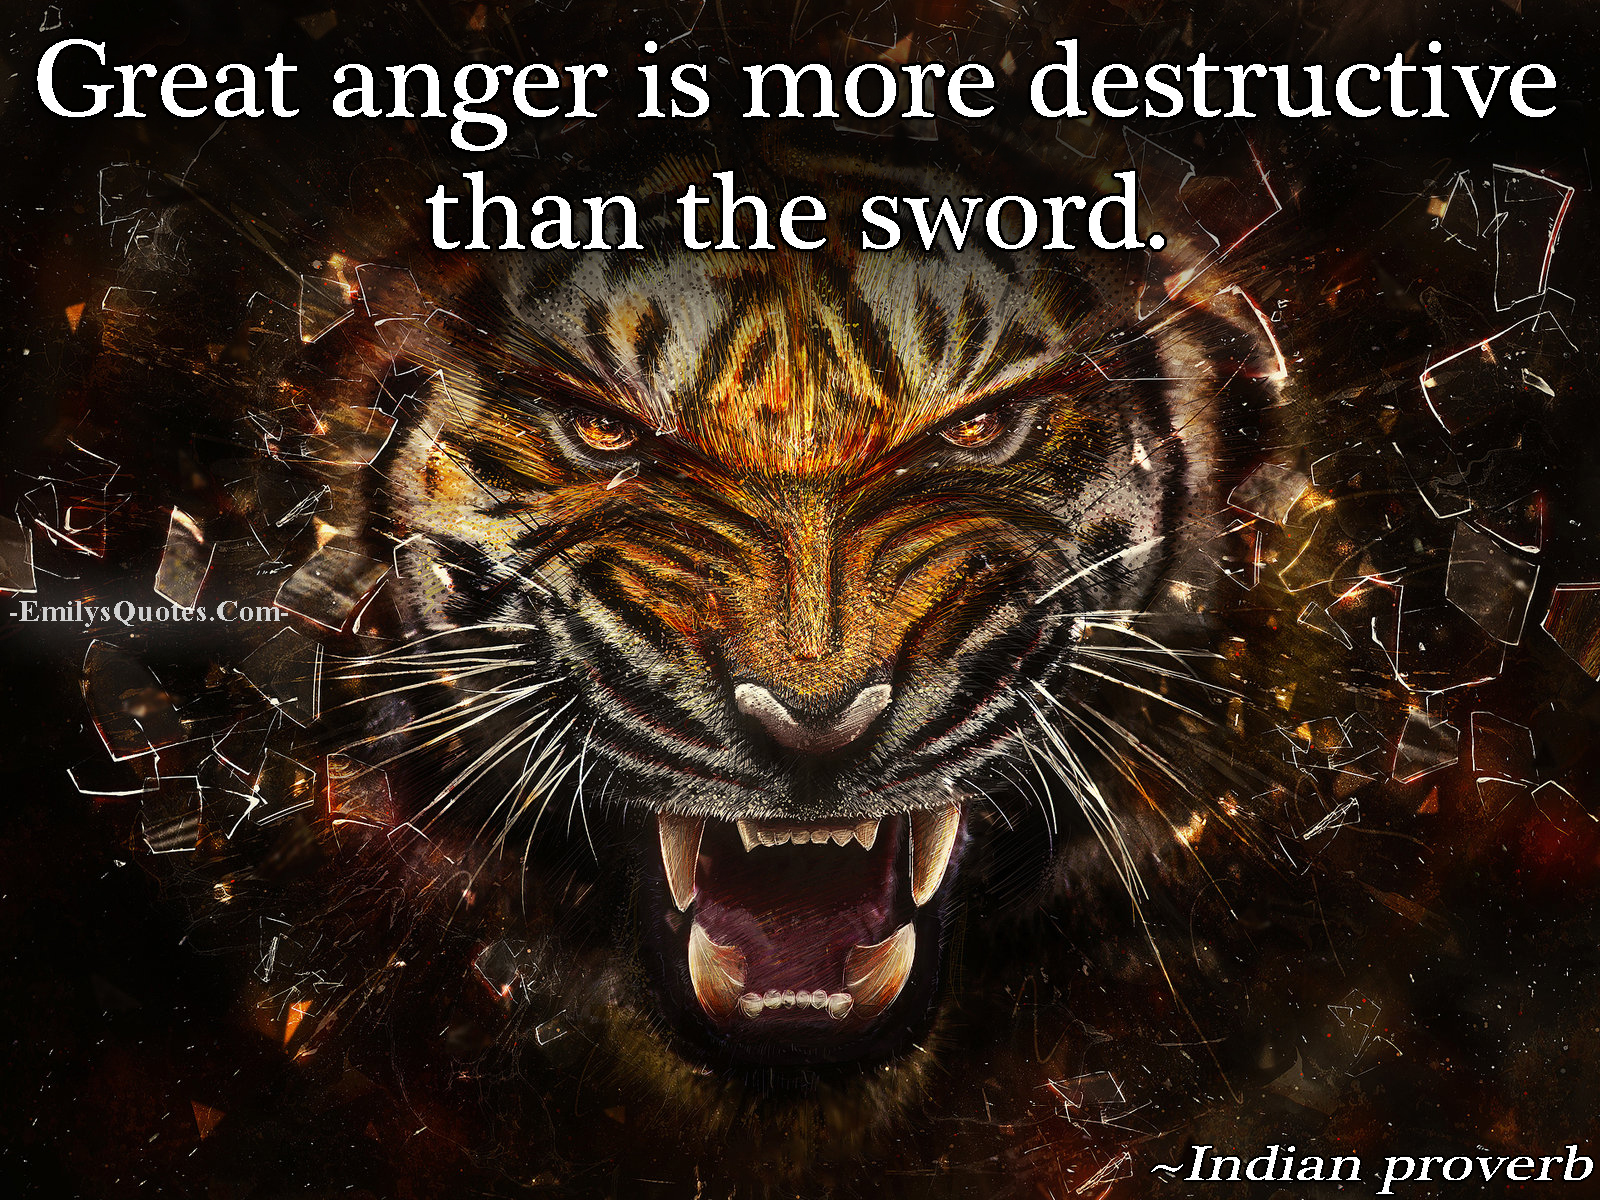 Great anger is more destructive than the sword